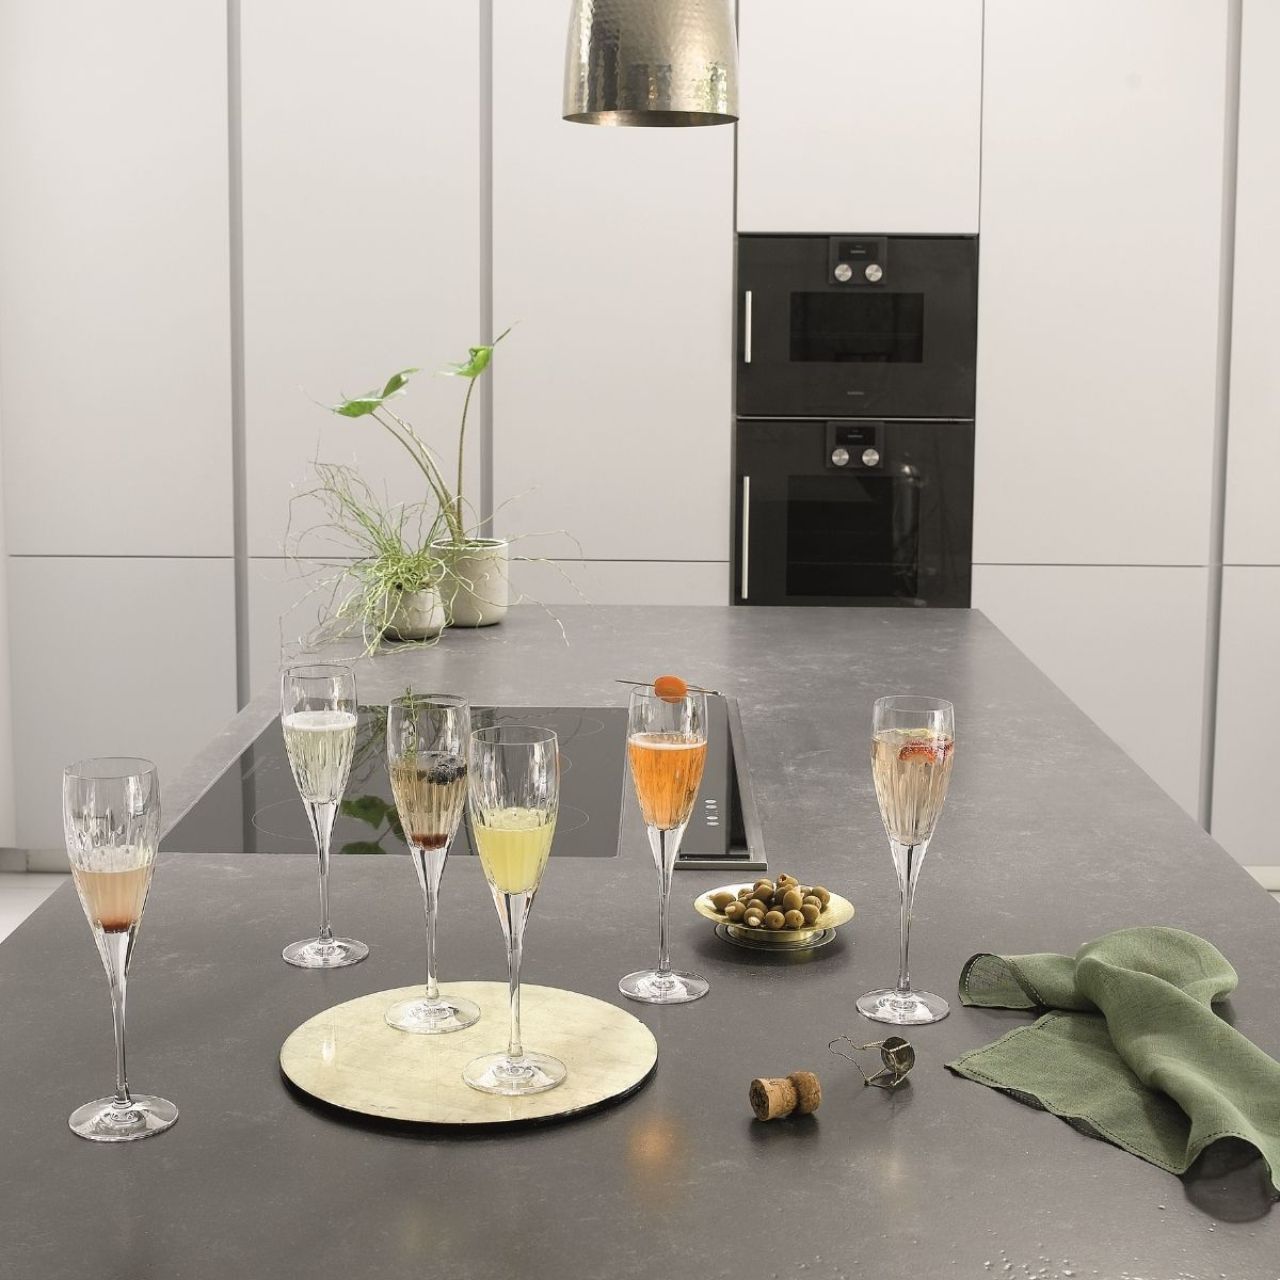 Waterford Crystal Mara Champagne Flute Set of 6  Celebrating the beauty of simplicity, Mara, the Irish meaning for sea, is inspired by the wild Atlantic Ocean. Showcasing both long and short deep vertical cuts, Mara's modern design with elegant simplicity is now available as a set of six. 